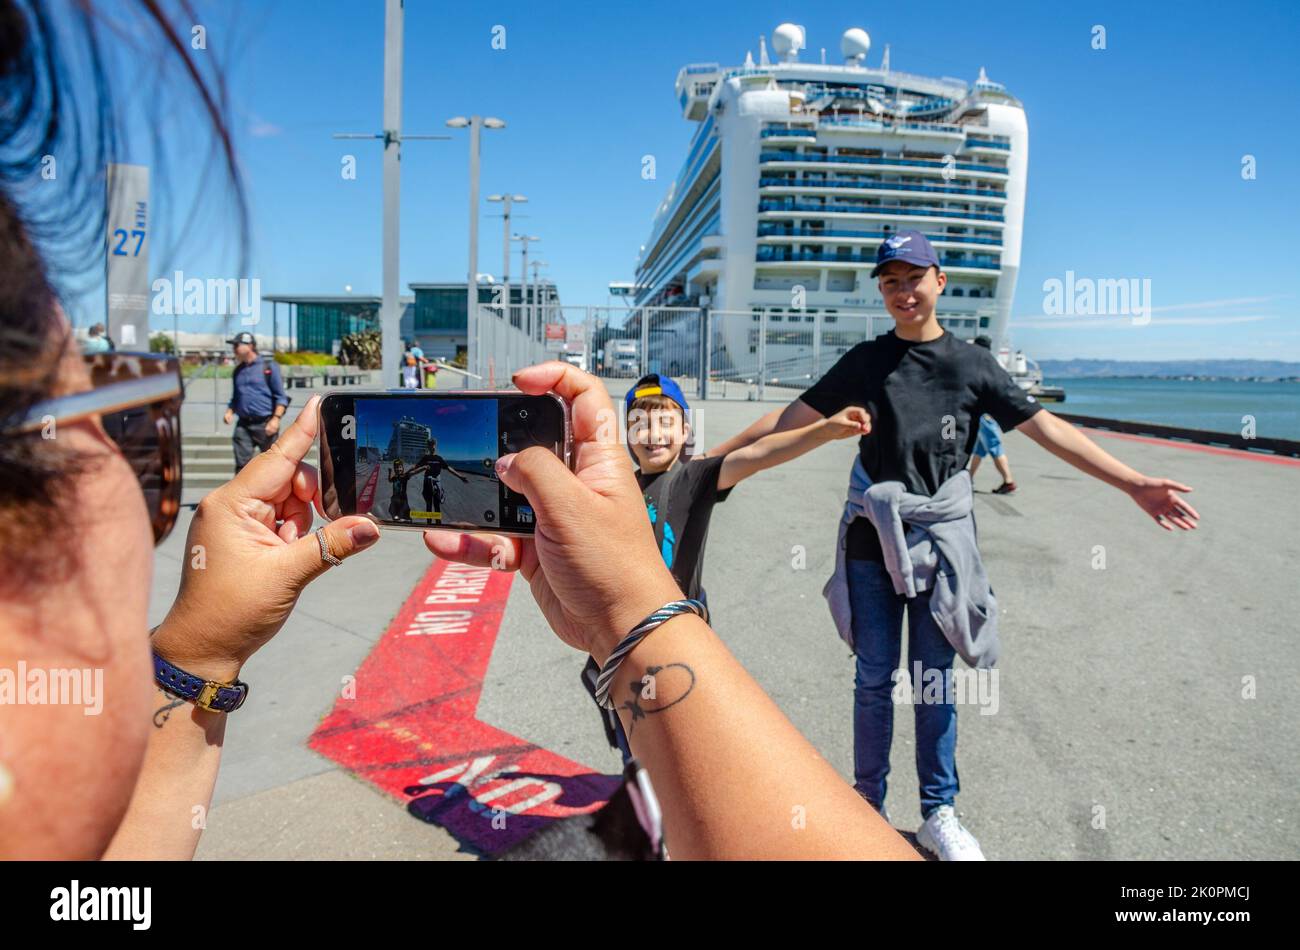 A lady takes a photo of family in front of Ruby Princess, a cruise liner docked at The James R Herman Cruise Terminal at Pier 27 in San Francisco Stock Photo